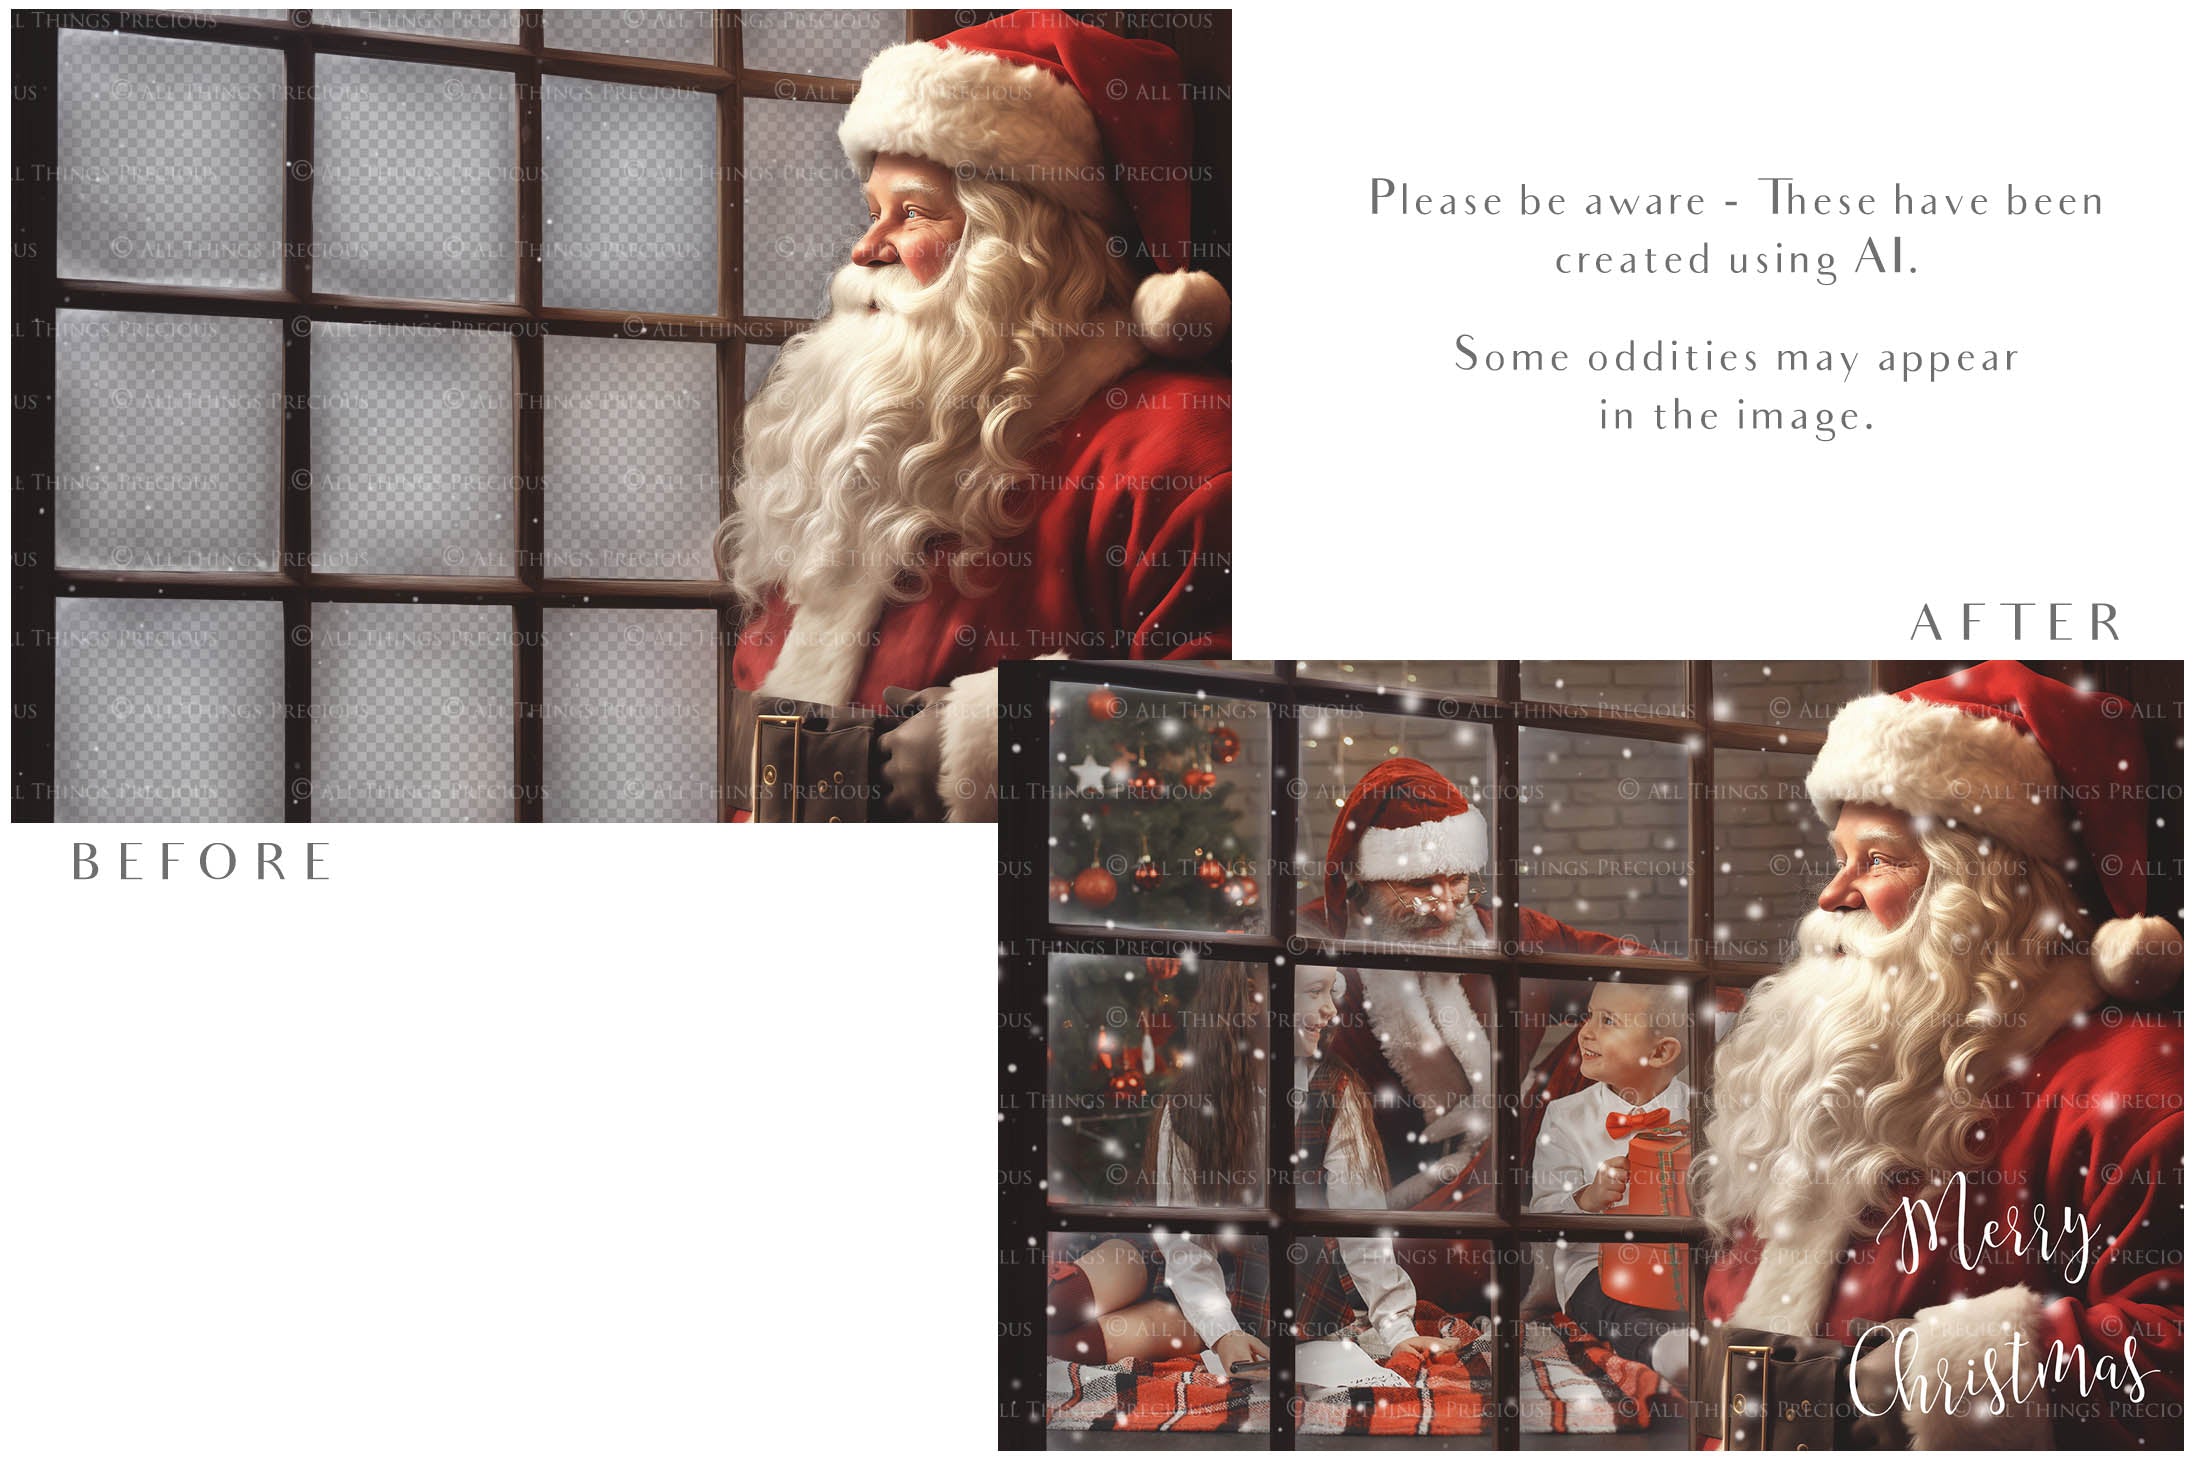 Digital Santa Window Background, with snow flurries and a PSD Template included in the set. The Window has a glass effect and is transparent, perfect for you to add your own images and retain the effect. Use for Digital Cards, Printed Art, Scrapbooking or for photography. Find more at www.atptextures.com